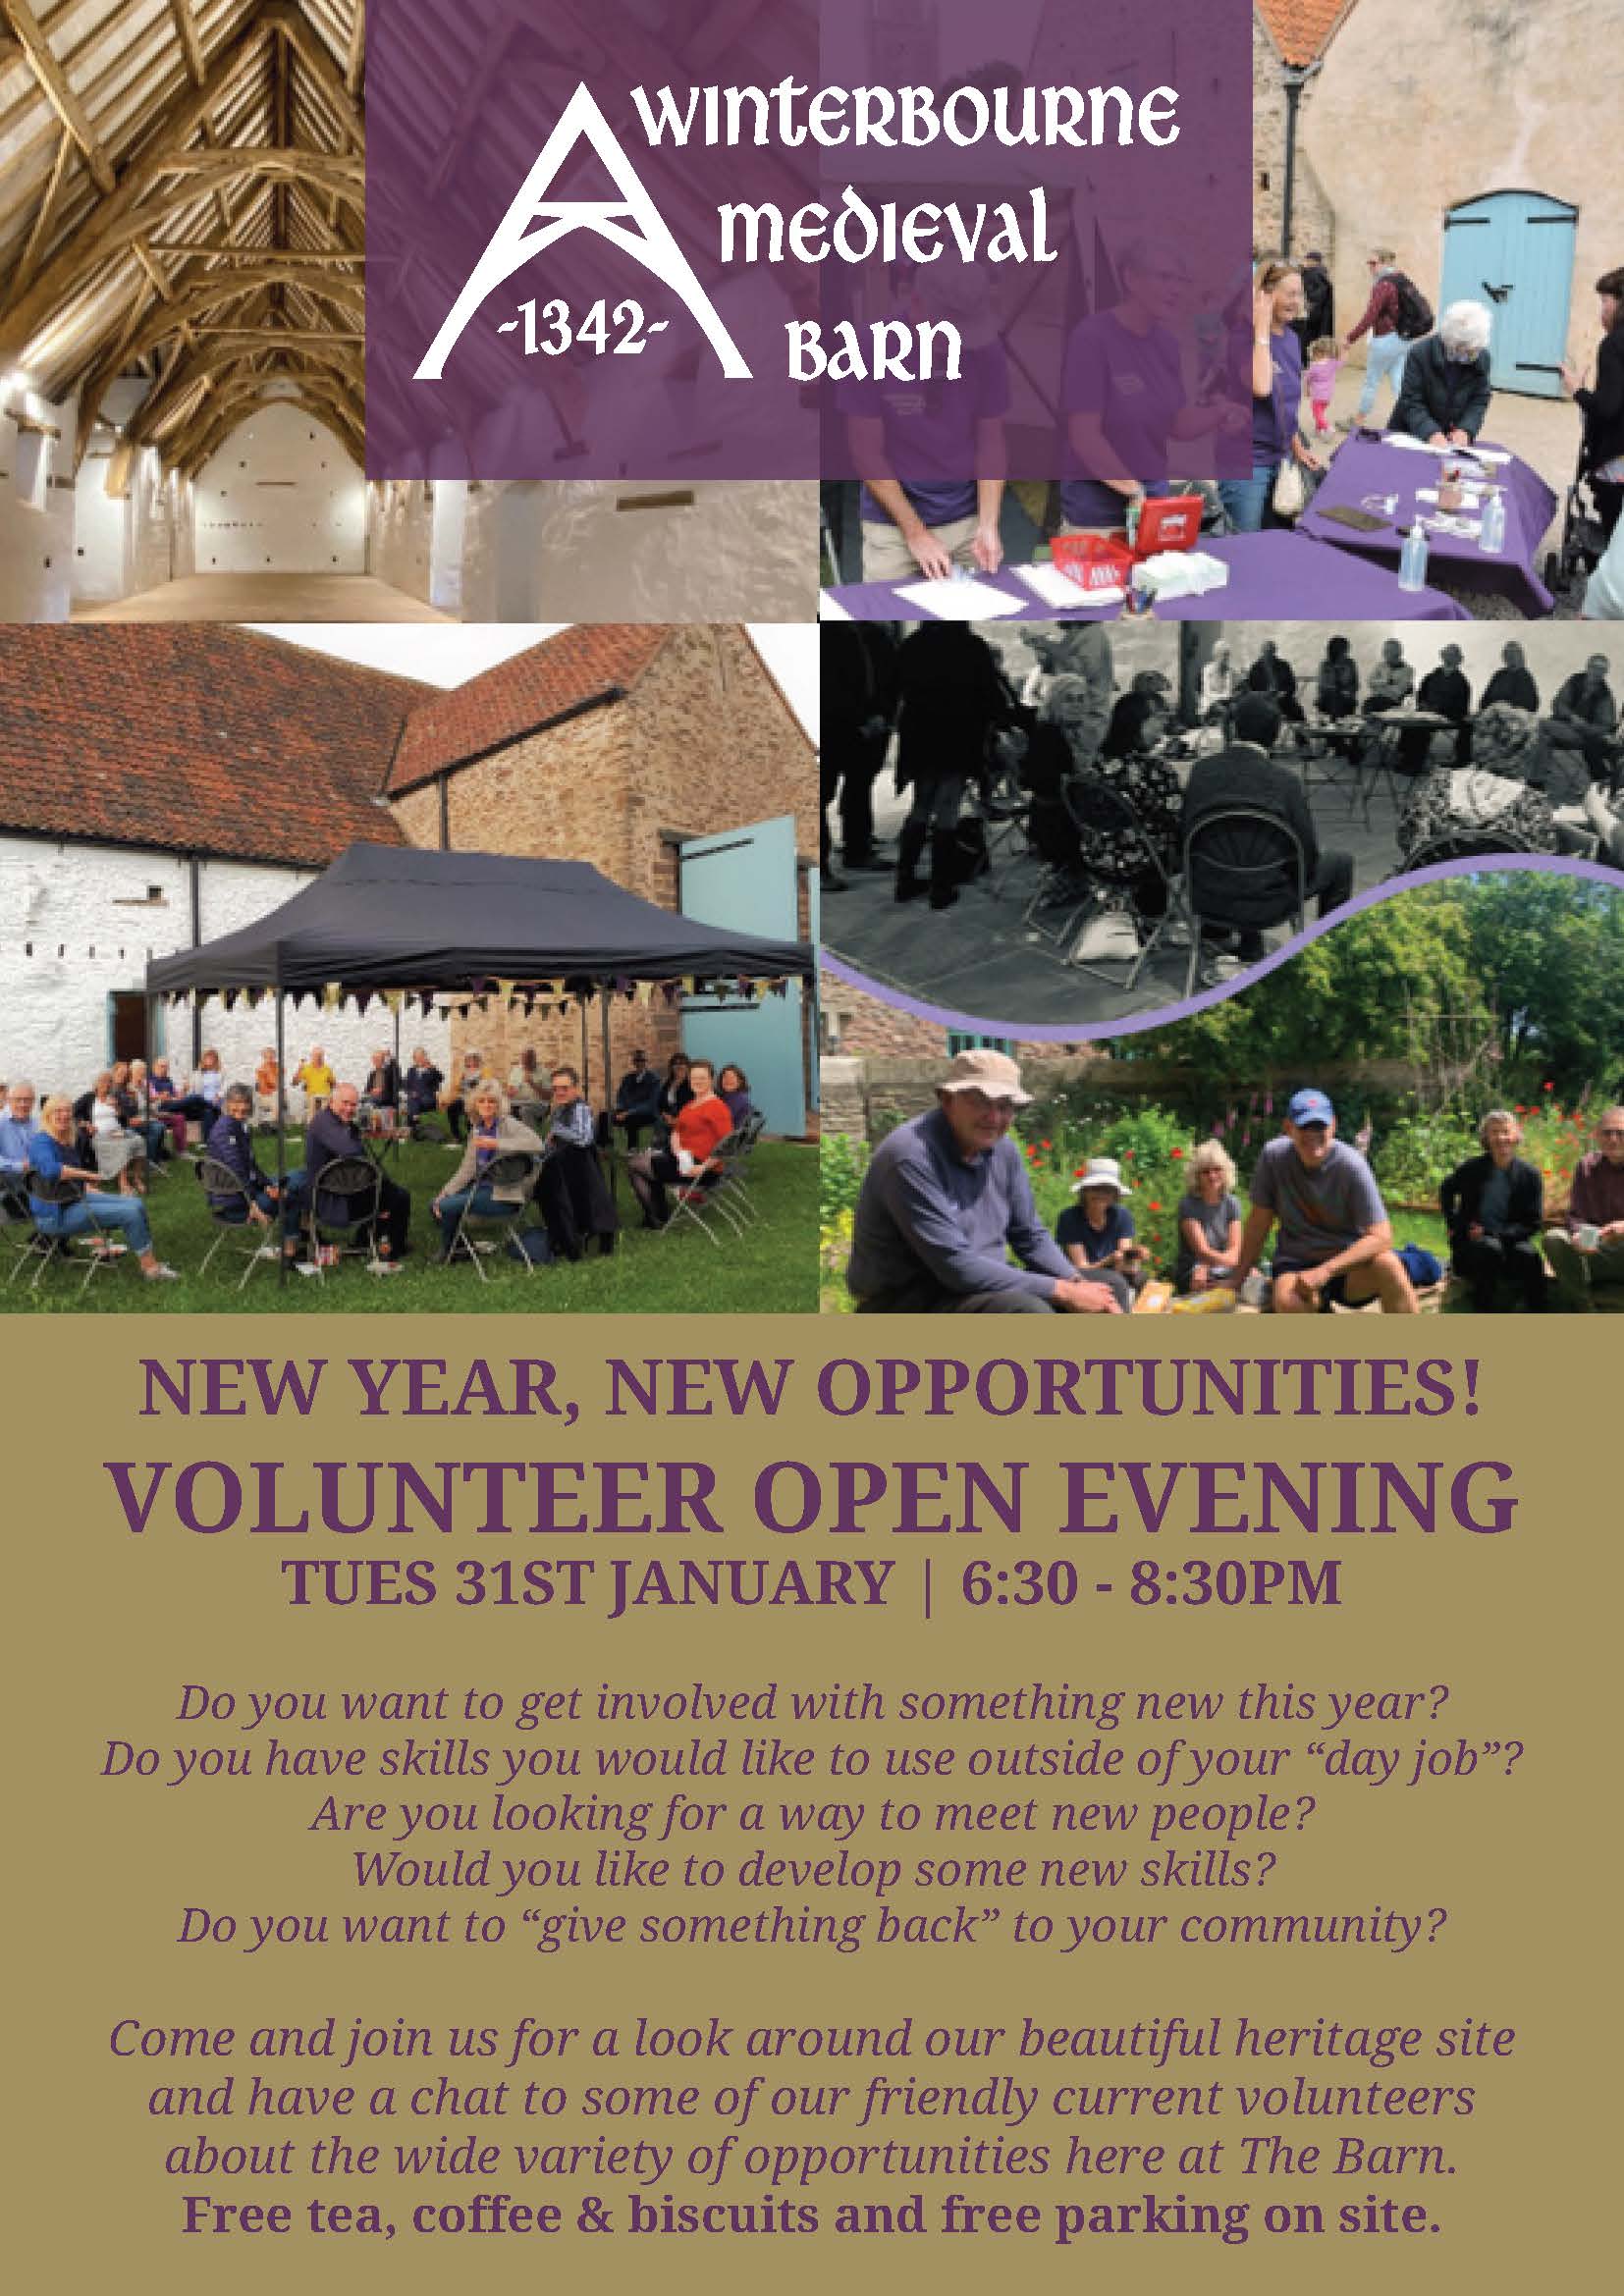 Winterbourne Medieval Barn -1342- / NEW YEAR, NEW OPPORTUNITIES! VOLUNTEER OPEN EVENING TUES 31ST JANUARY | 6:30 - 8:30PM Do you want to get involved with something new this year? Do you have skills you would like to use outside of your “day job”? Are you looking for a way to meet new people? Would you like to develop some new skills? Do you want to “give something back” to your community? Come and join us for a look around our beautiful heritage site and have a chat to some of our friendly current volunteers about the wide variety of opportunities here at The Barn. Free tea, coffee & biscuits and free parking on site.